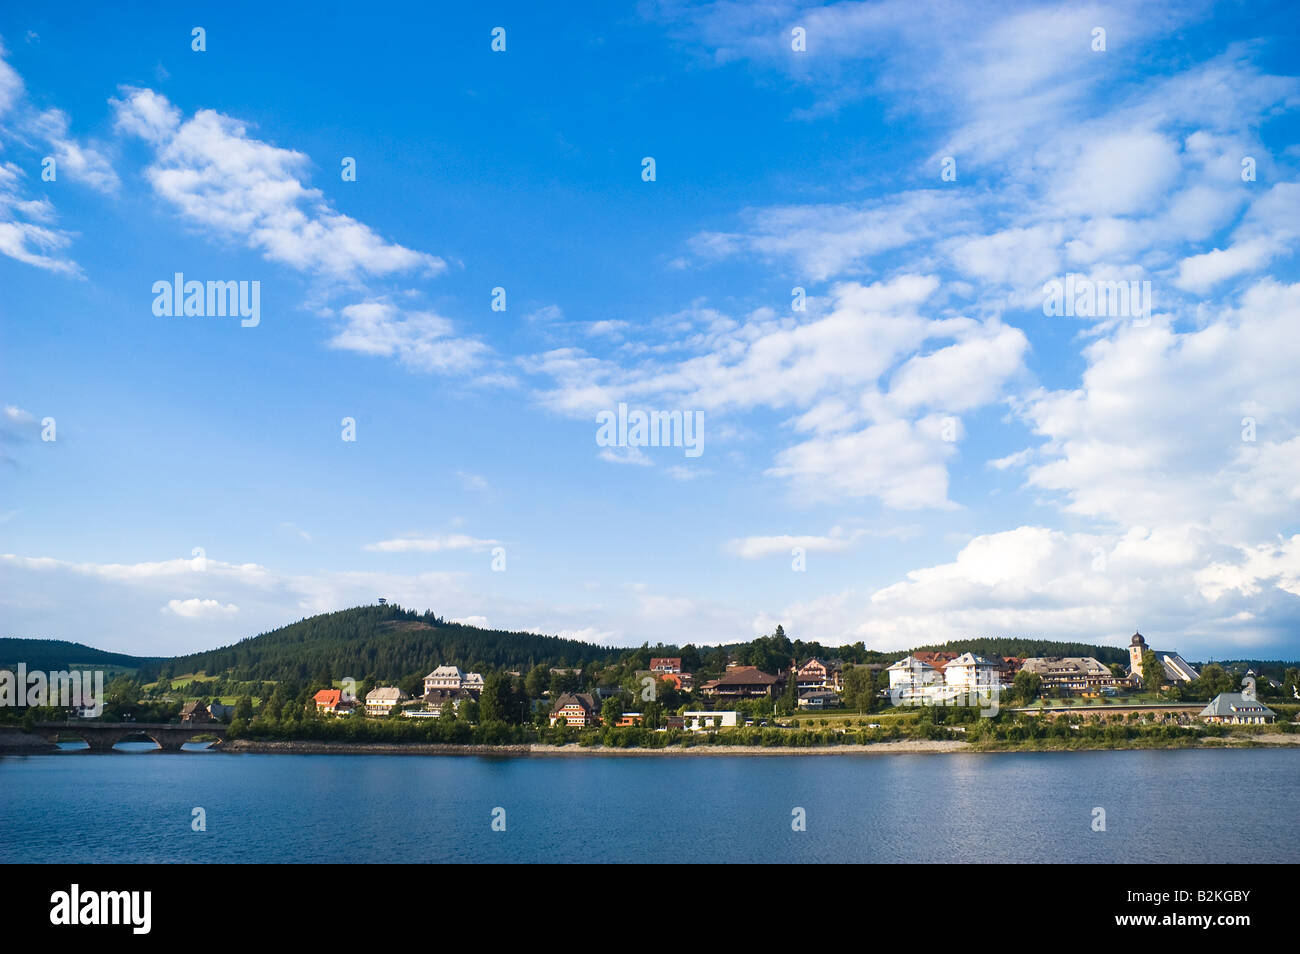 Schluchsee, Germany Stock Photo